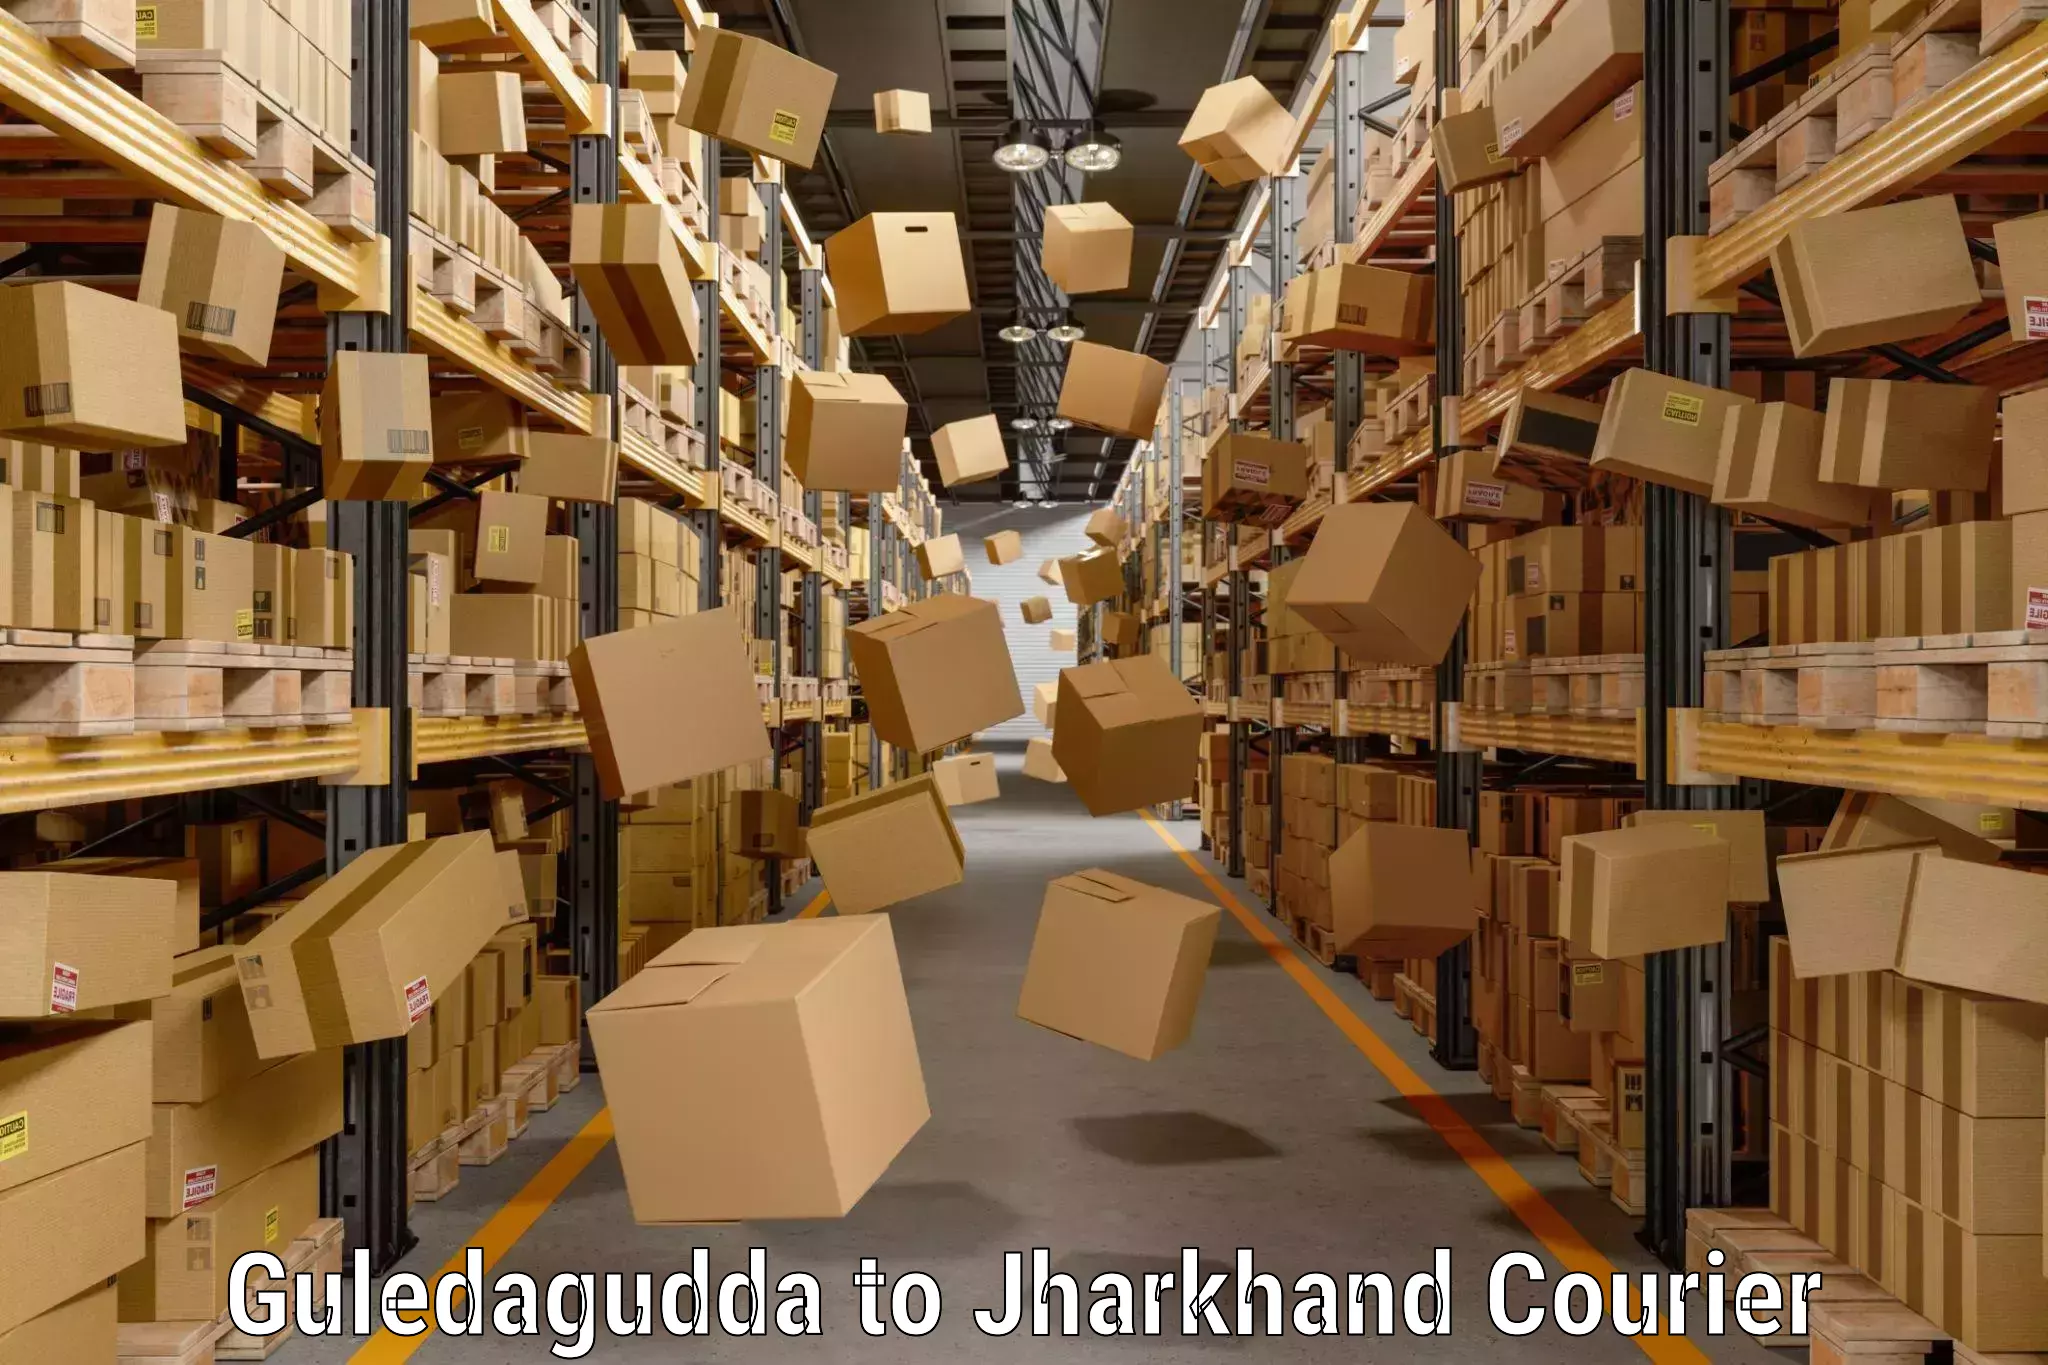 Baggage delivery technology Guledagudda to Jharkhand